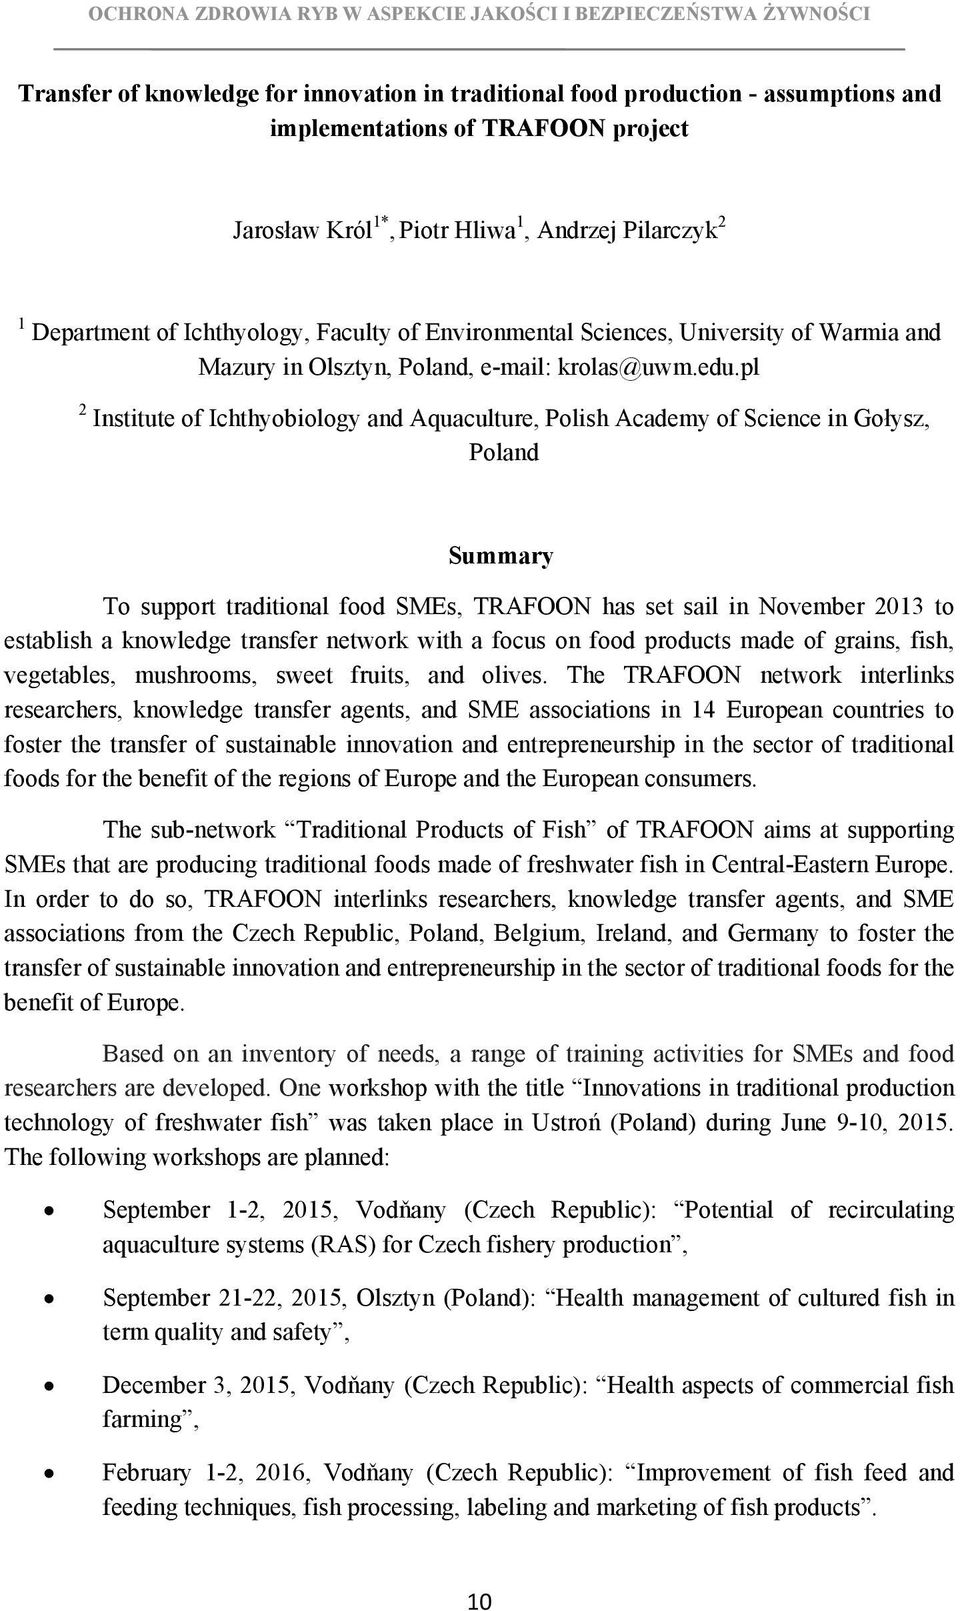 pl 2 Institute of Ichthyobiology and Aquaculture, Polish Academy of Science in Gołysz, Poland Summary To support traditional food SMEs, TRAFOON has set sail in November 2013 to establish a knowledge